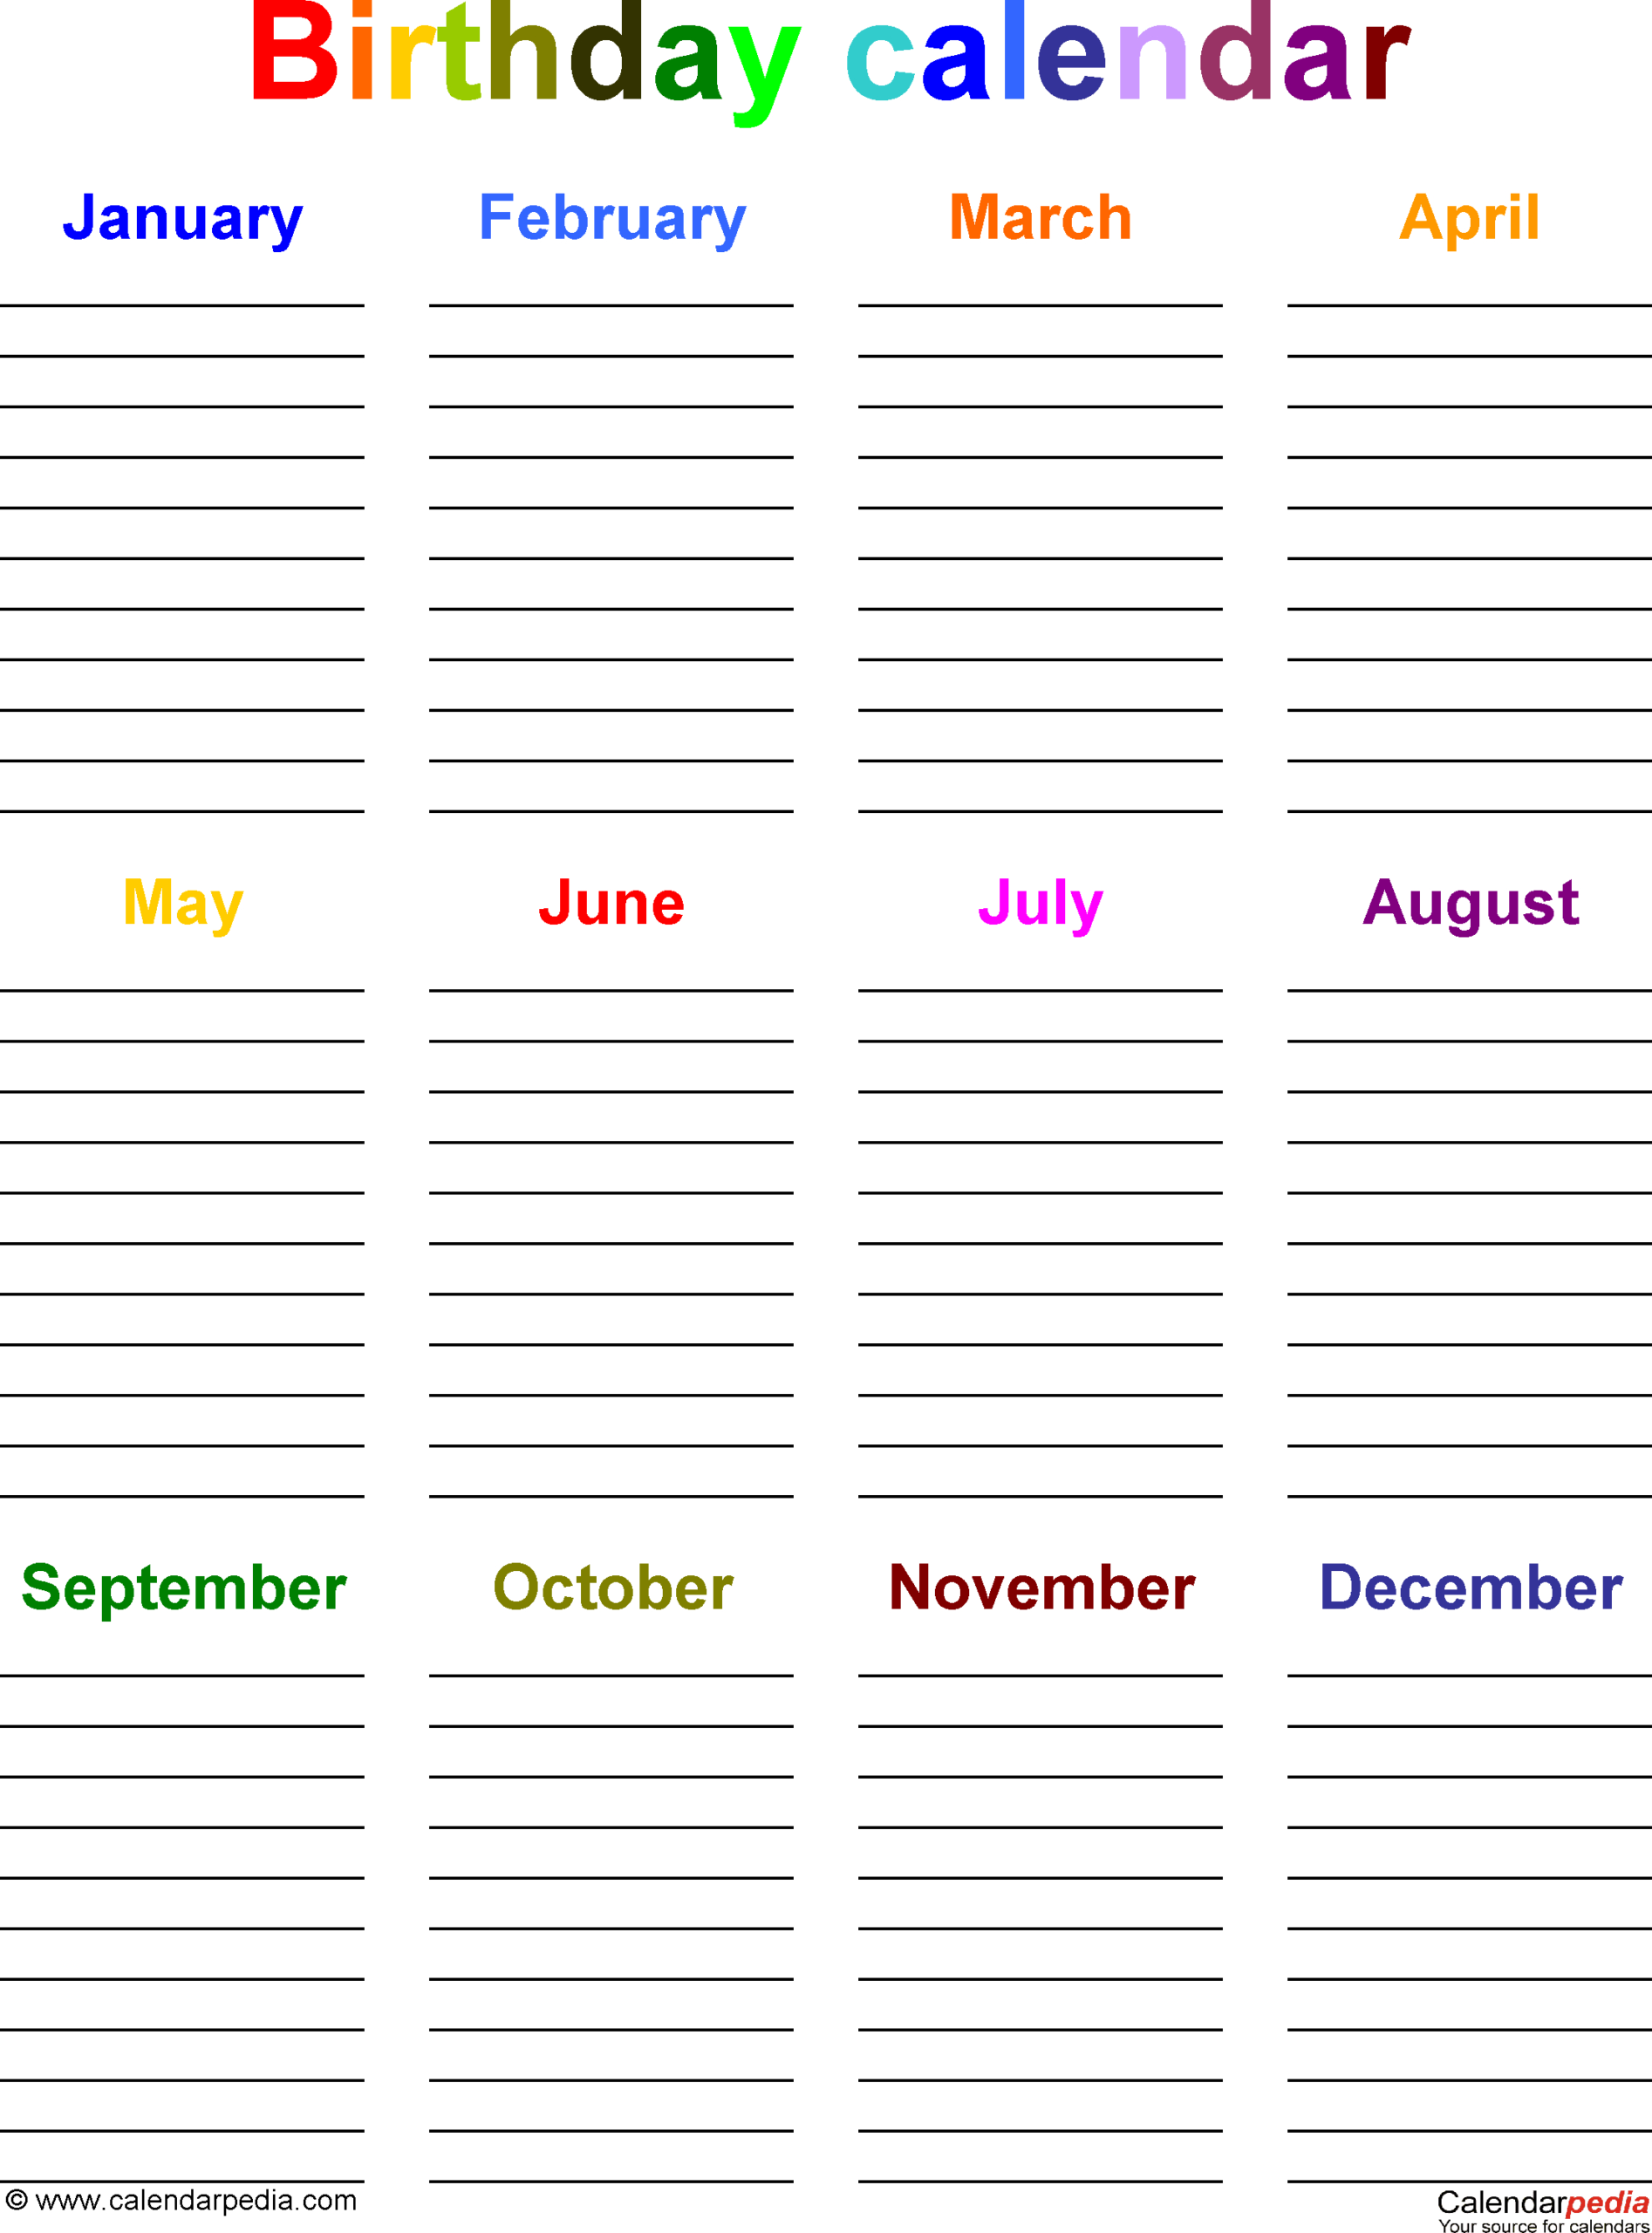 Template 5: Pdf Template For Birthday Calendar In Color in Microsoft Birthday Calendar Template